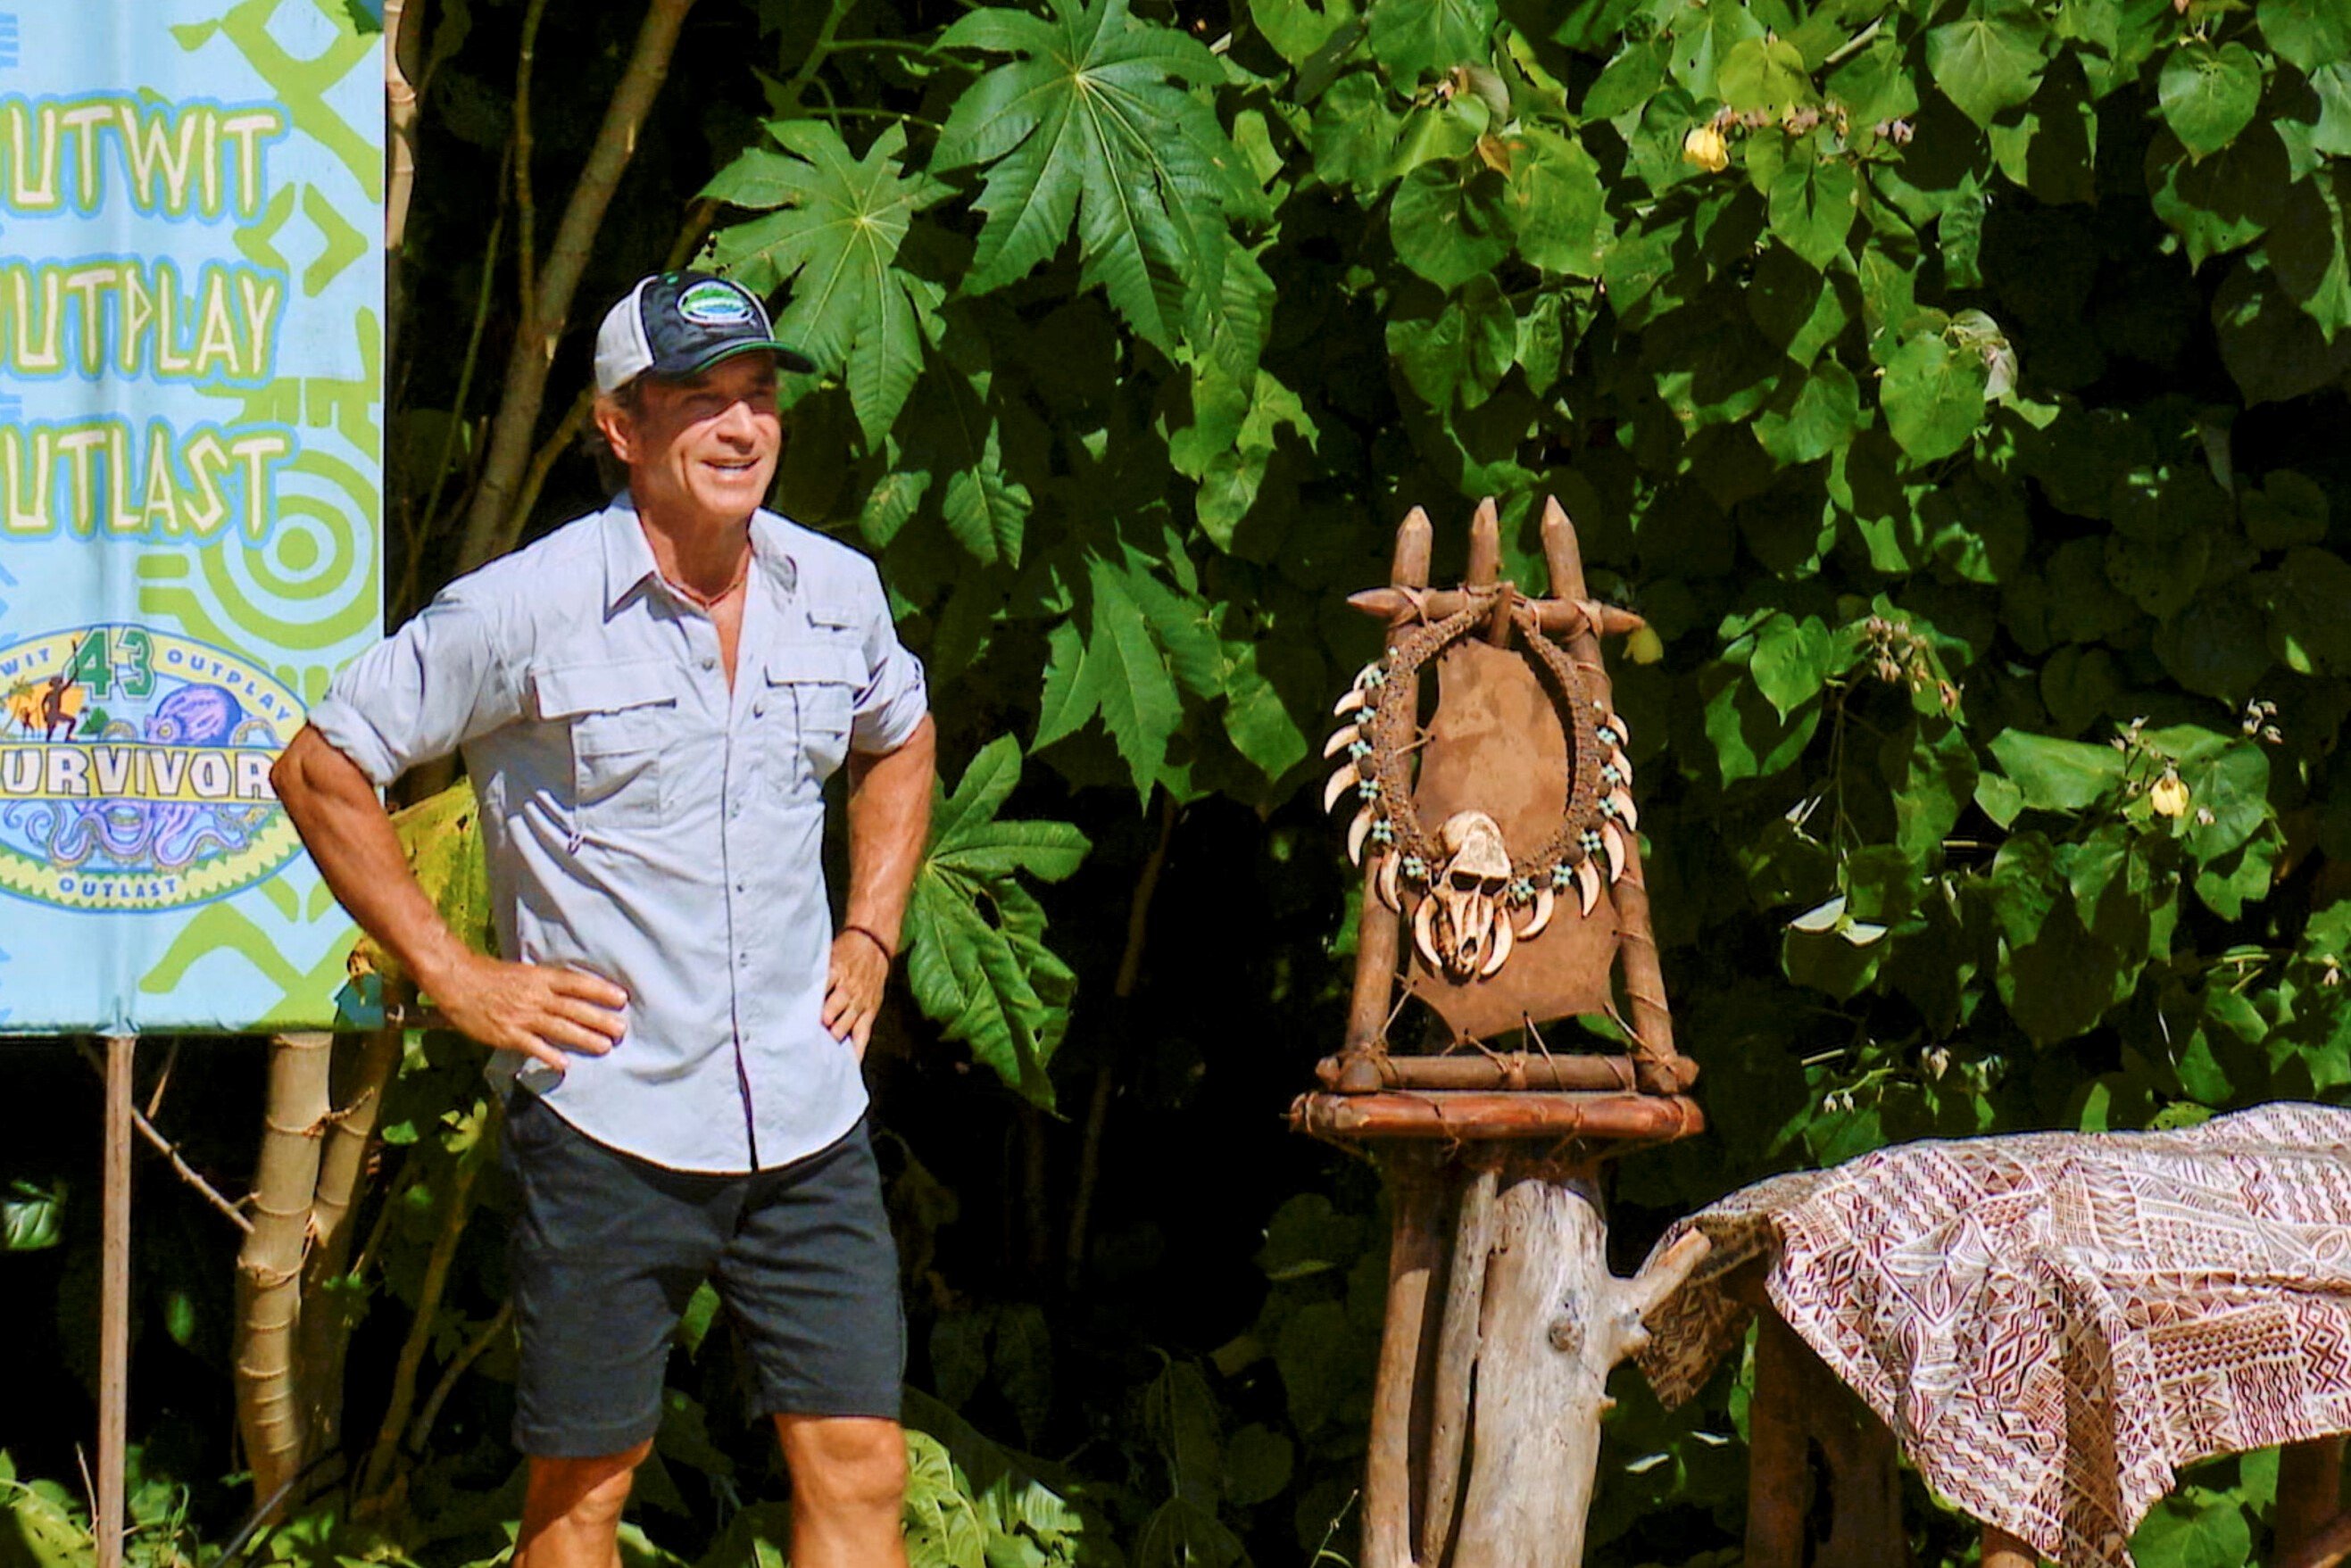 Jeff Probst, who will host the 'Survivor 44' premiere, wears a light blue button-down shirt, dark gray shorts, and a black, white, and green 'Survivor' hat. Probst stands next to the immunity necklace on the beach during 'Survivor 43.'